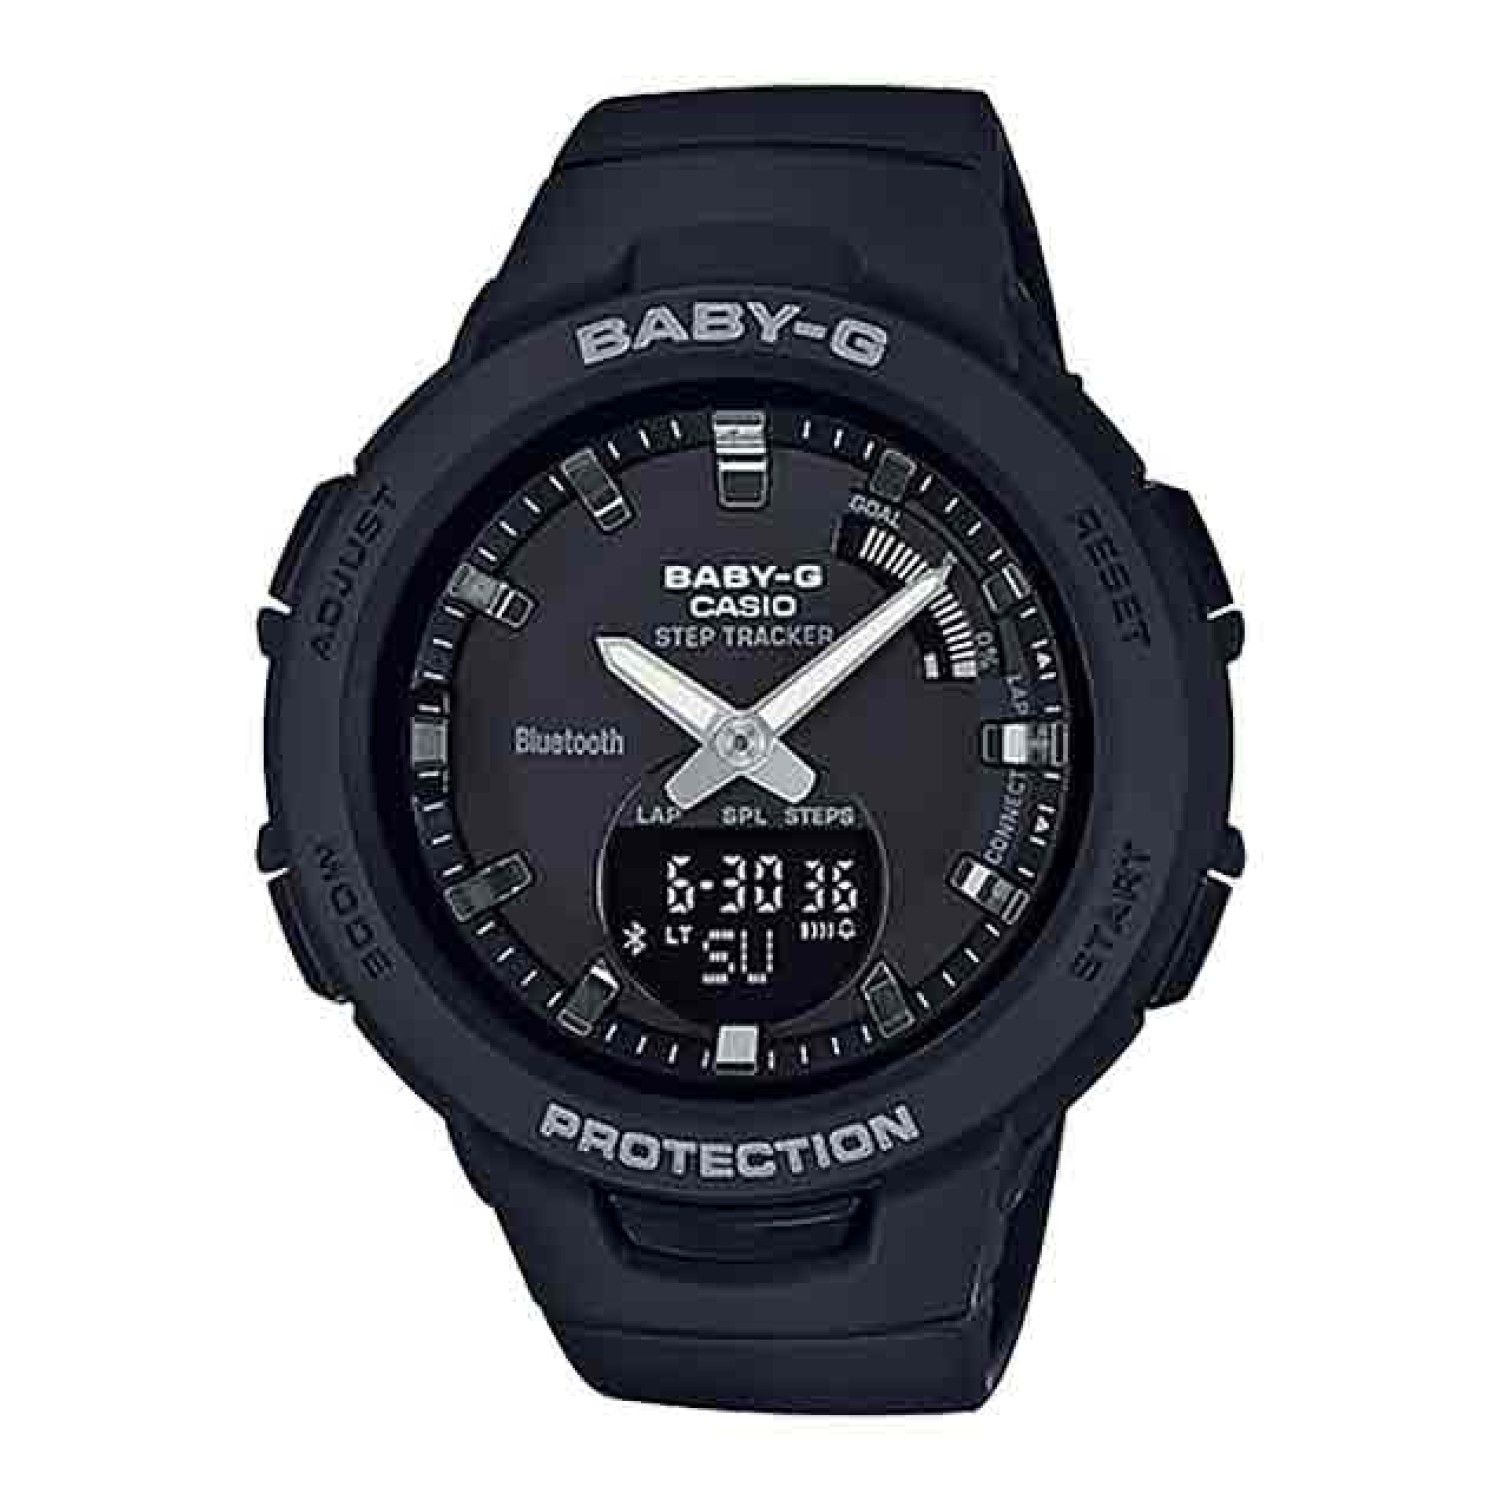 BSAB100-1A Casio BabY-G G-SQUAD Sports Watch. Introducing G-SQUAD, the new sports watch from the BABY-G lineup of casual watches for the active woman. G-SQUAD timepieces are designed and engineered to help support daily workouts and training, while also p